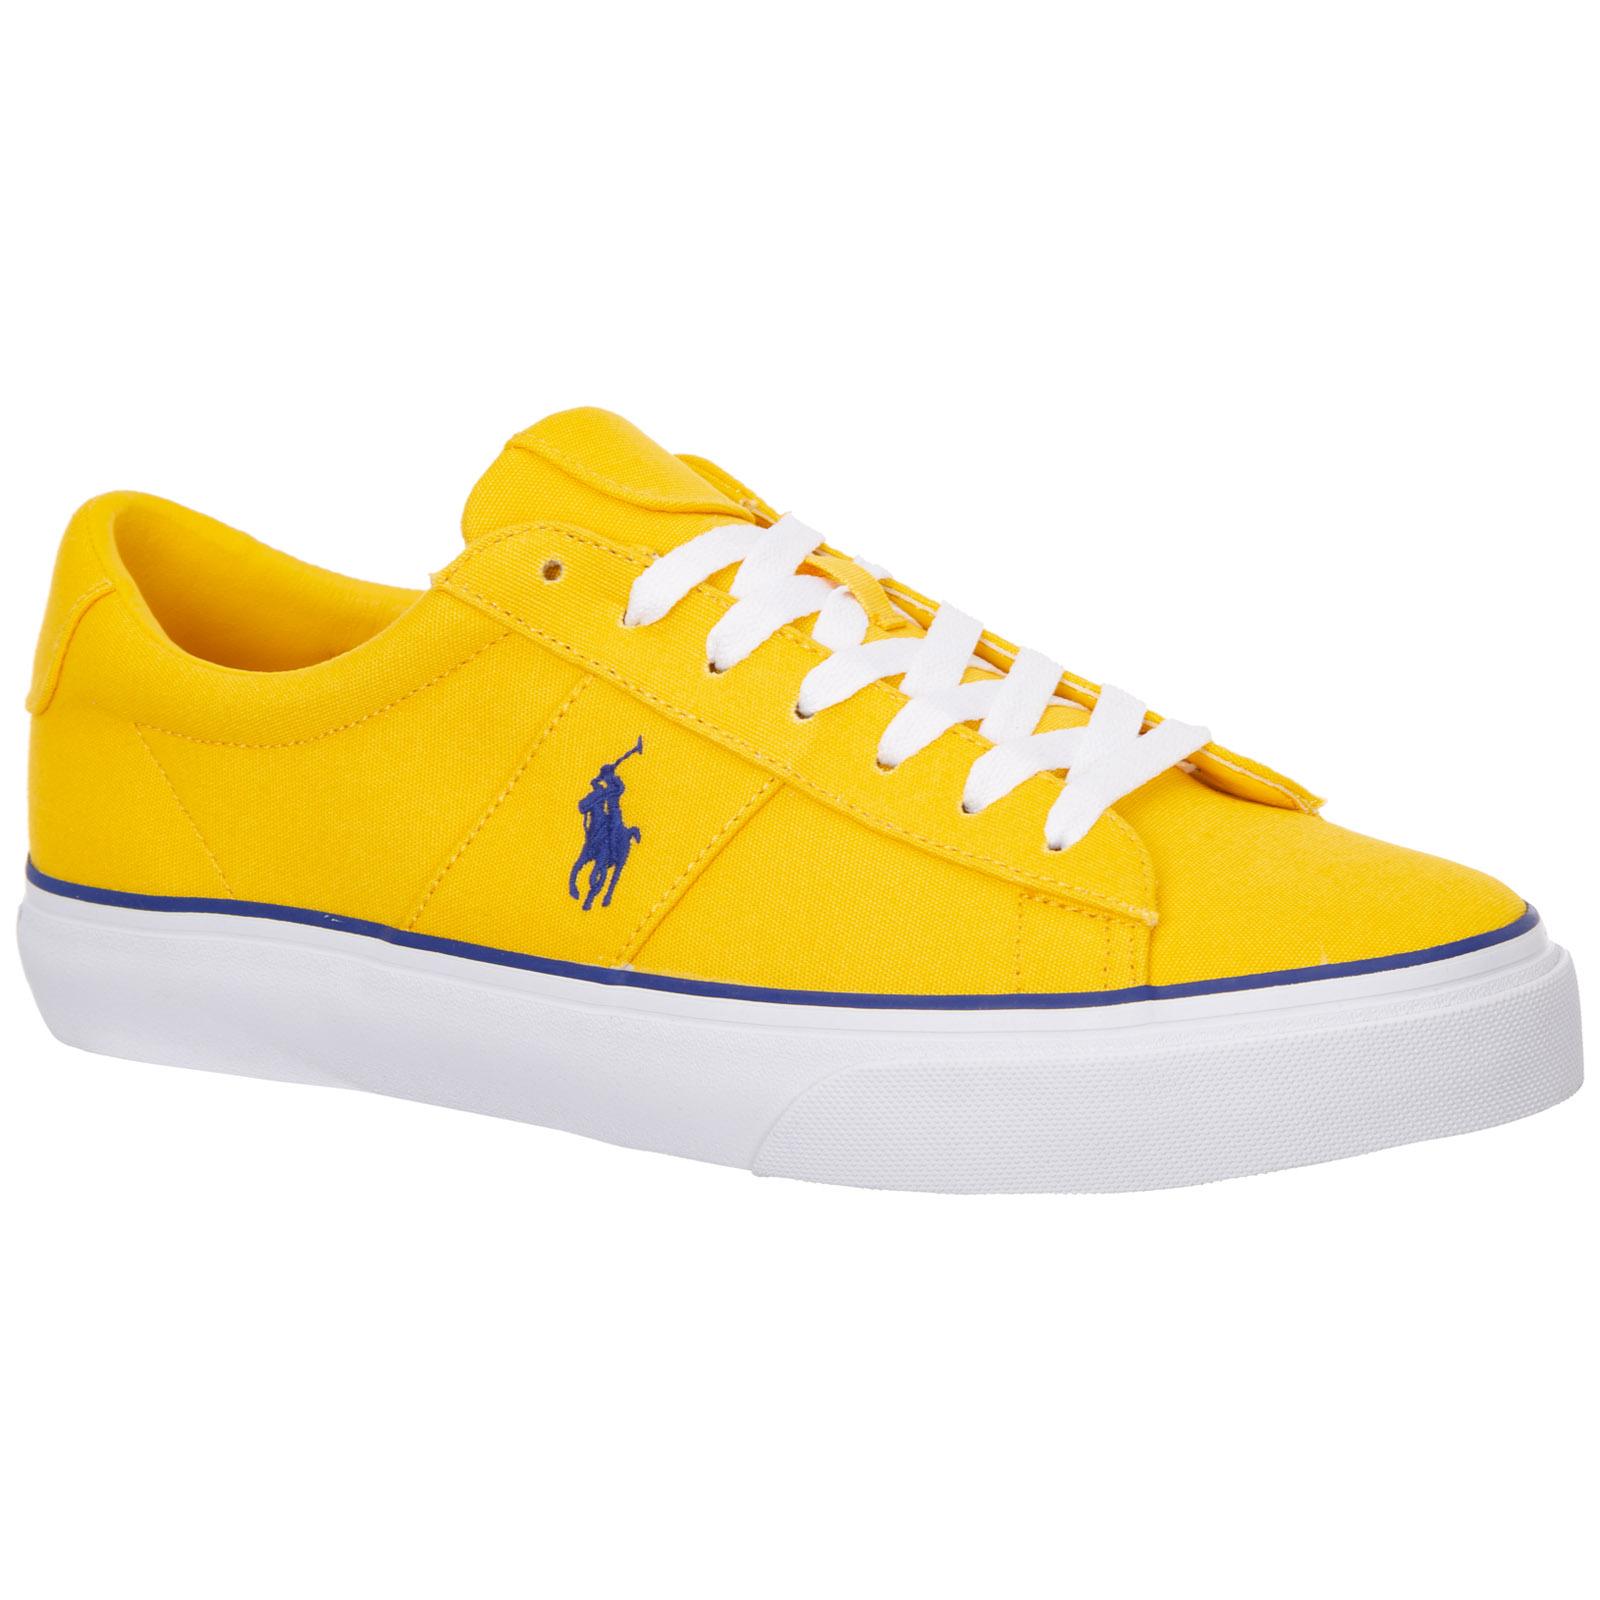 polo yellow shoes, great trade UP TO 78% OFF - larawebdev.com